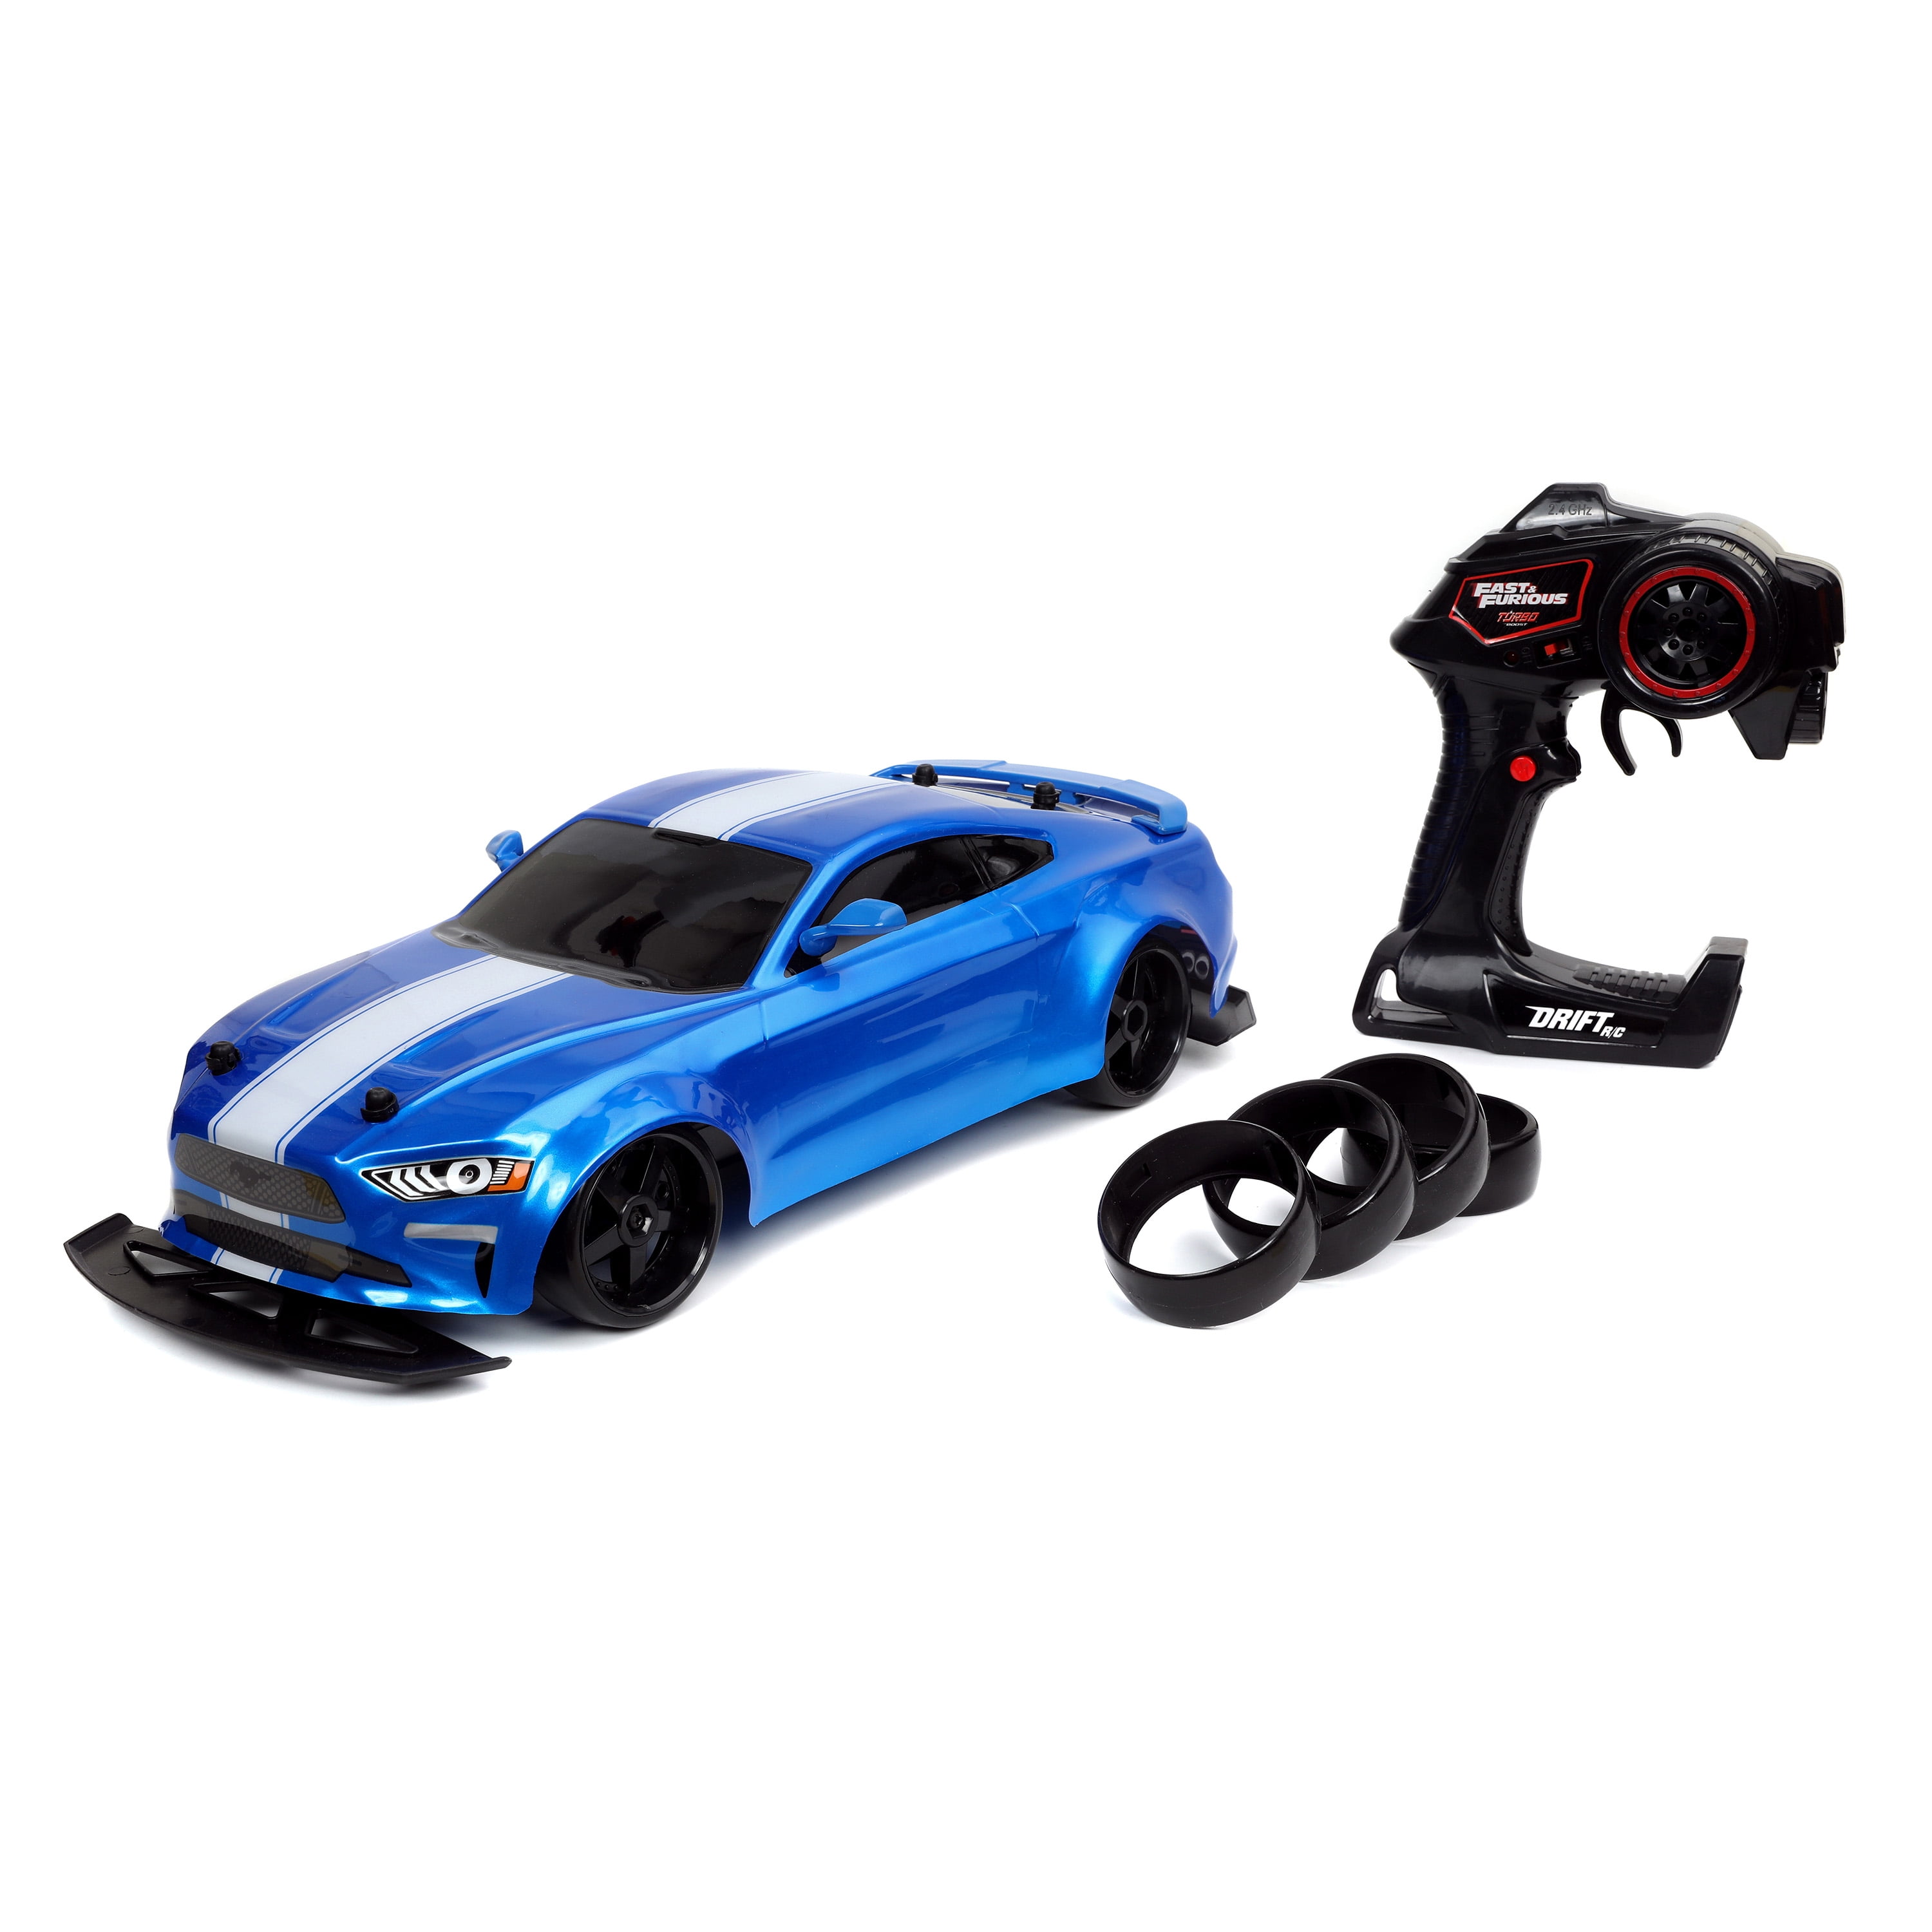 Brand New Air Hogs R/C Zero Gravity Real Rides Ford Mustang GT Wall Climber Toy 